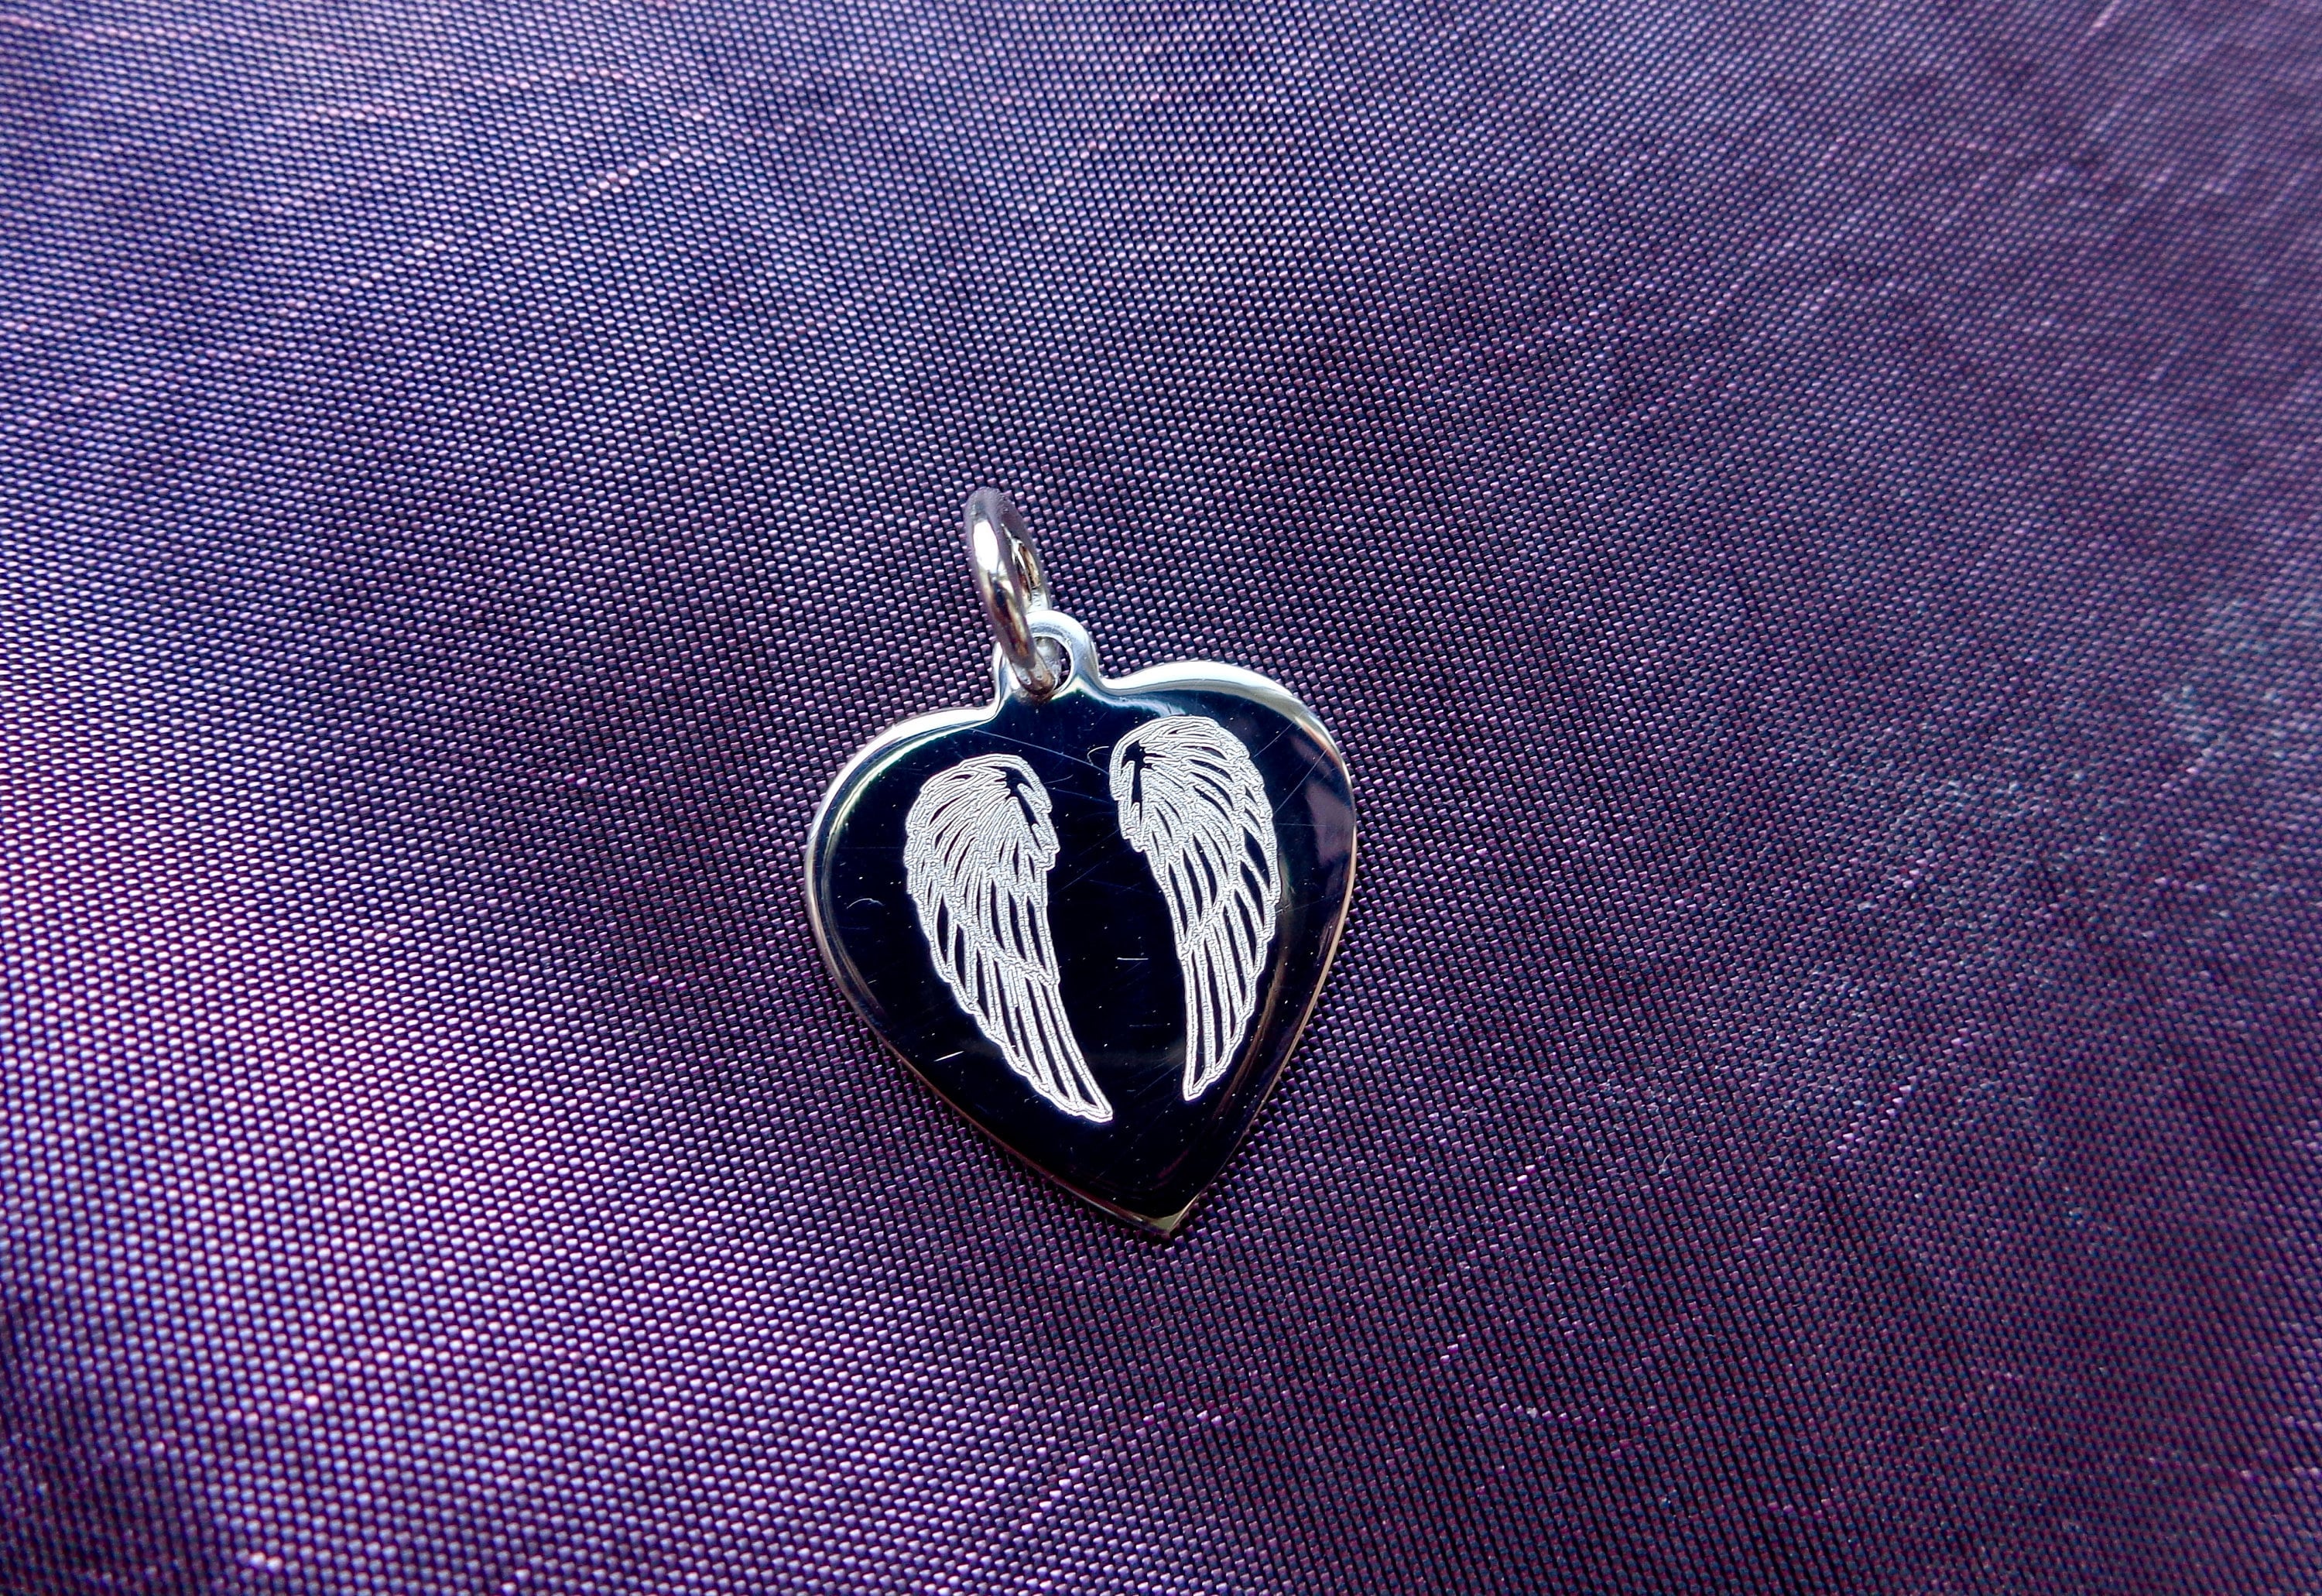 ANGEL WINGS HEART CHARM 925 STERLING SILVER Dangle clip jump ring FREE ENGRAVING